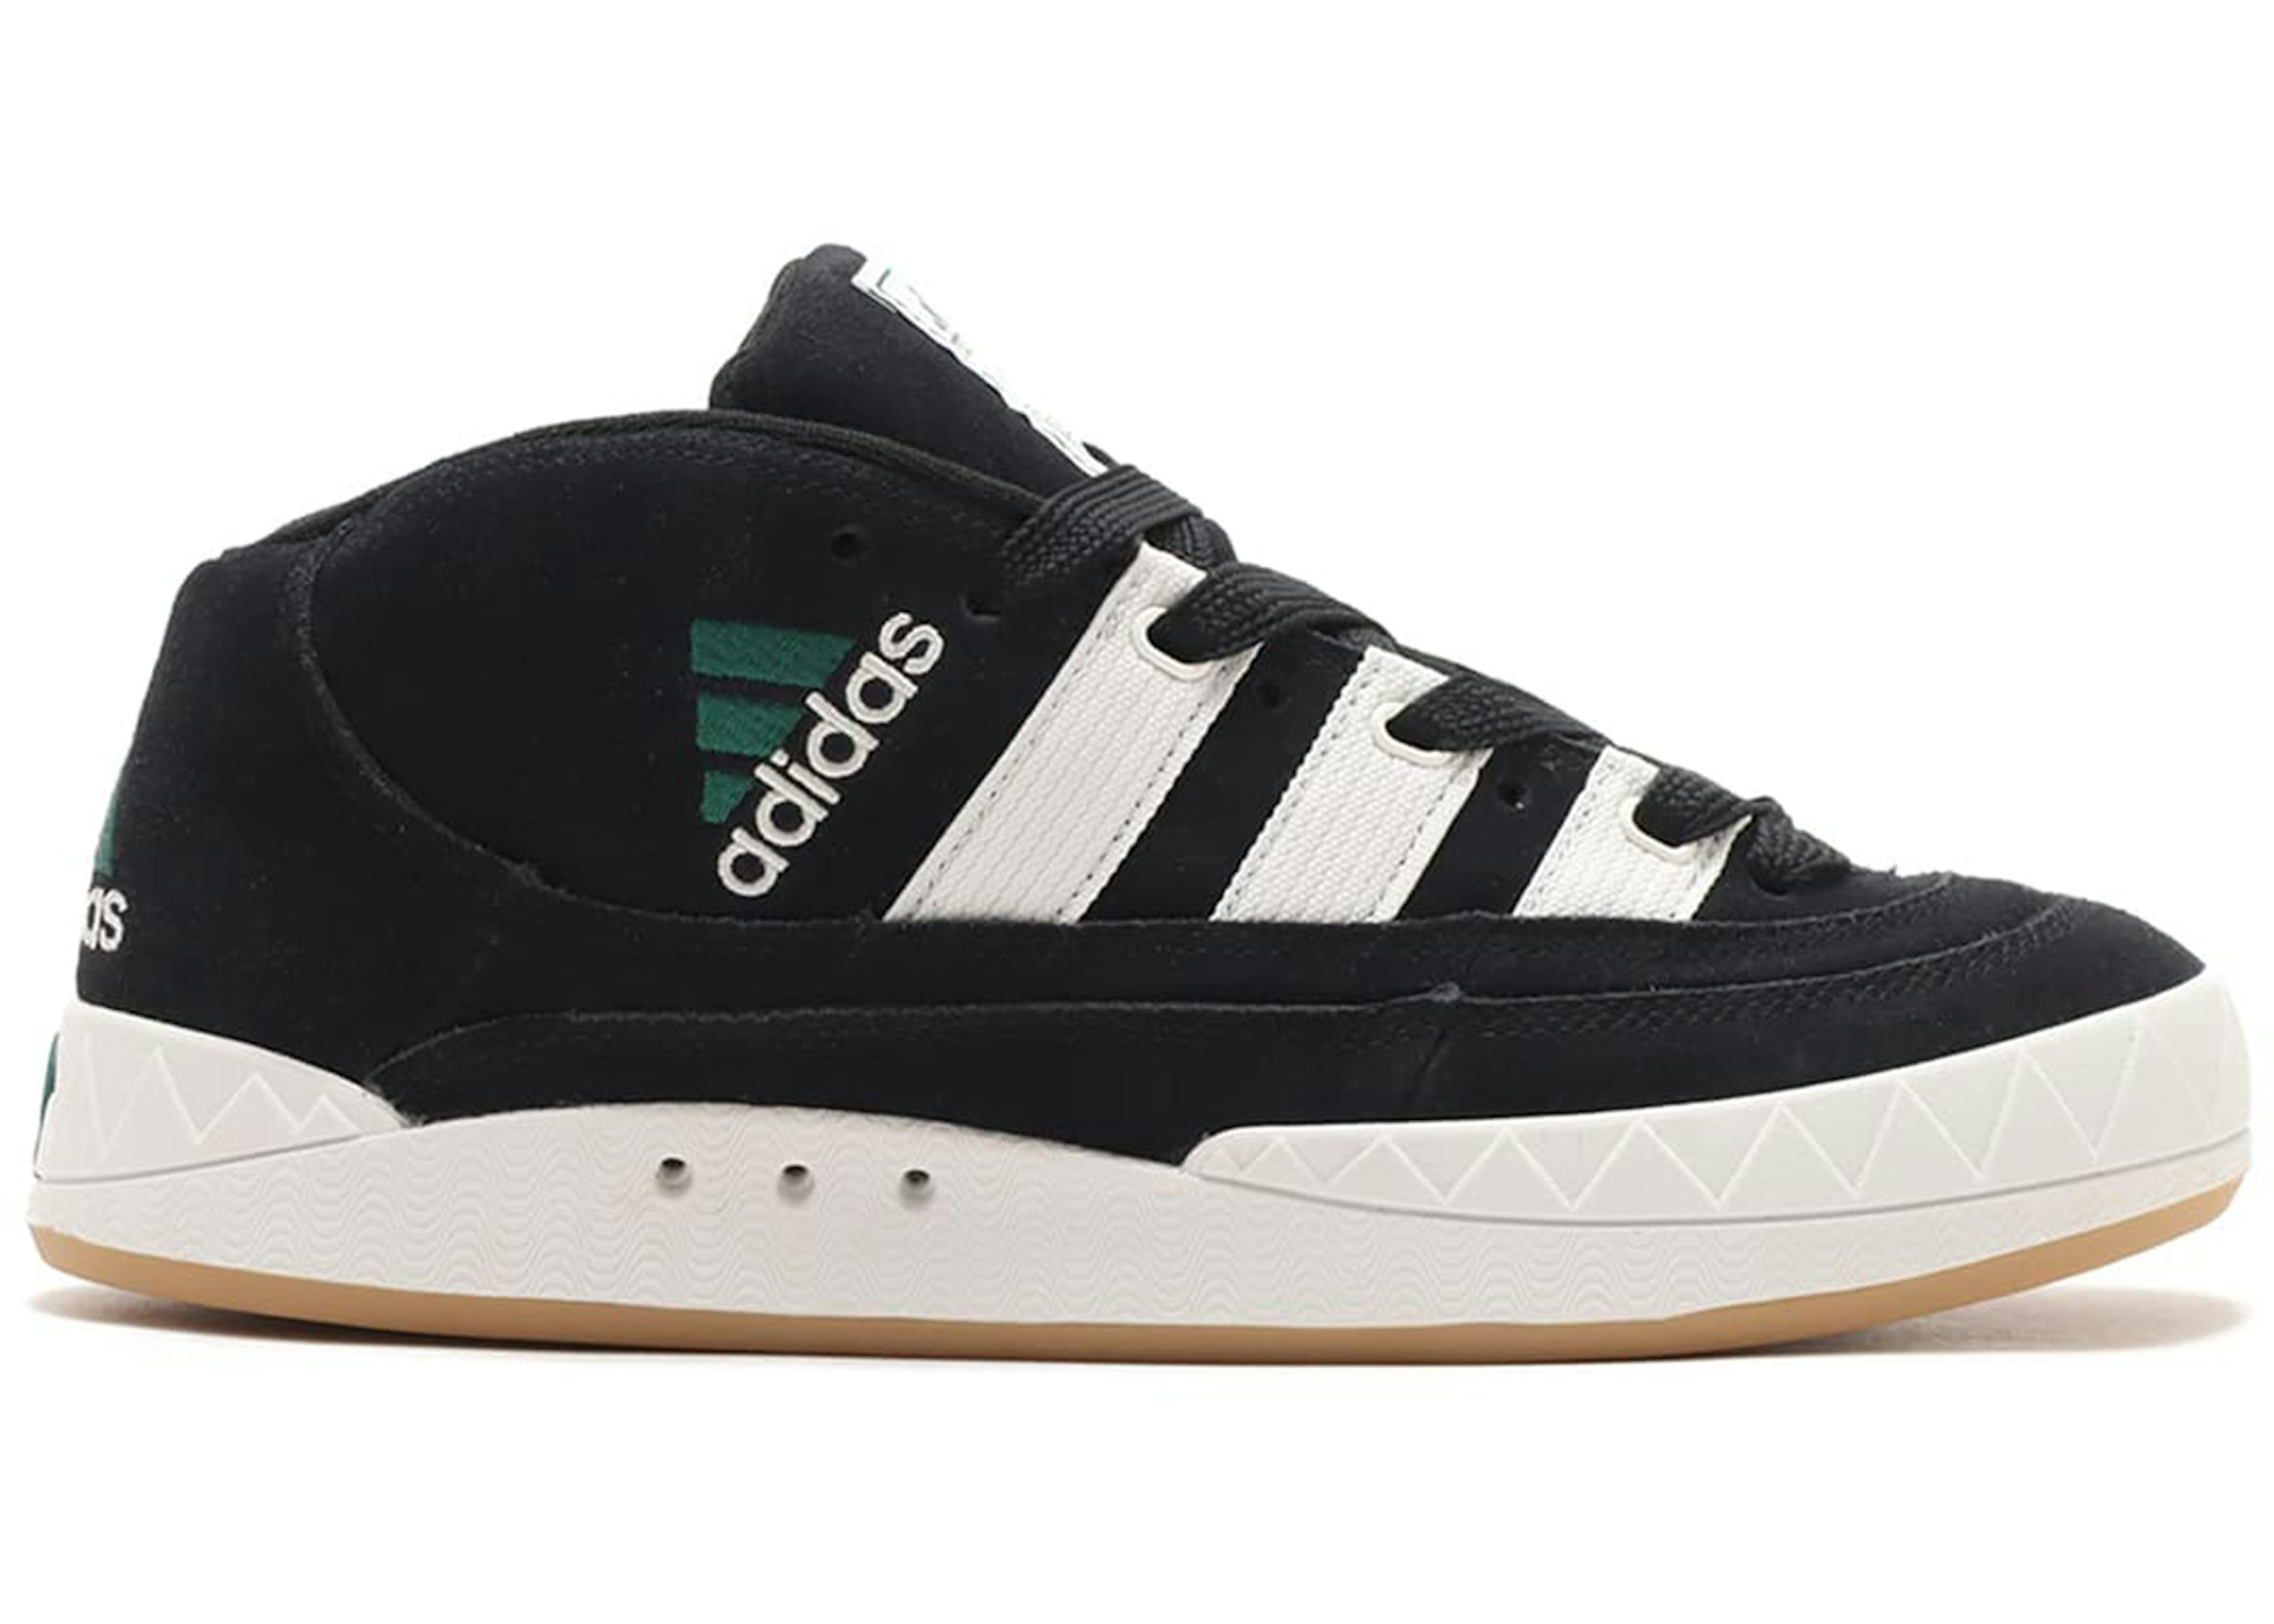 4.5 Size Shoes New Buy - & Skateboarding StockX Sneakers adidas